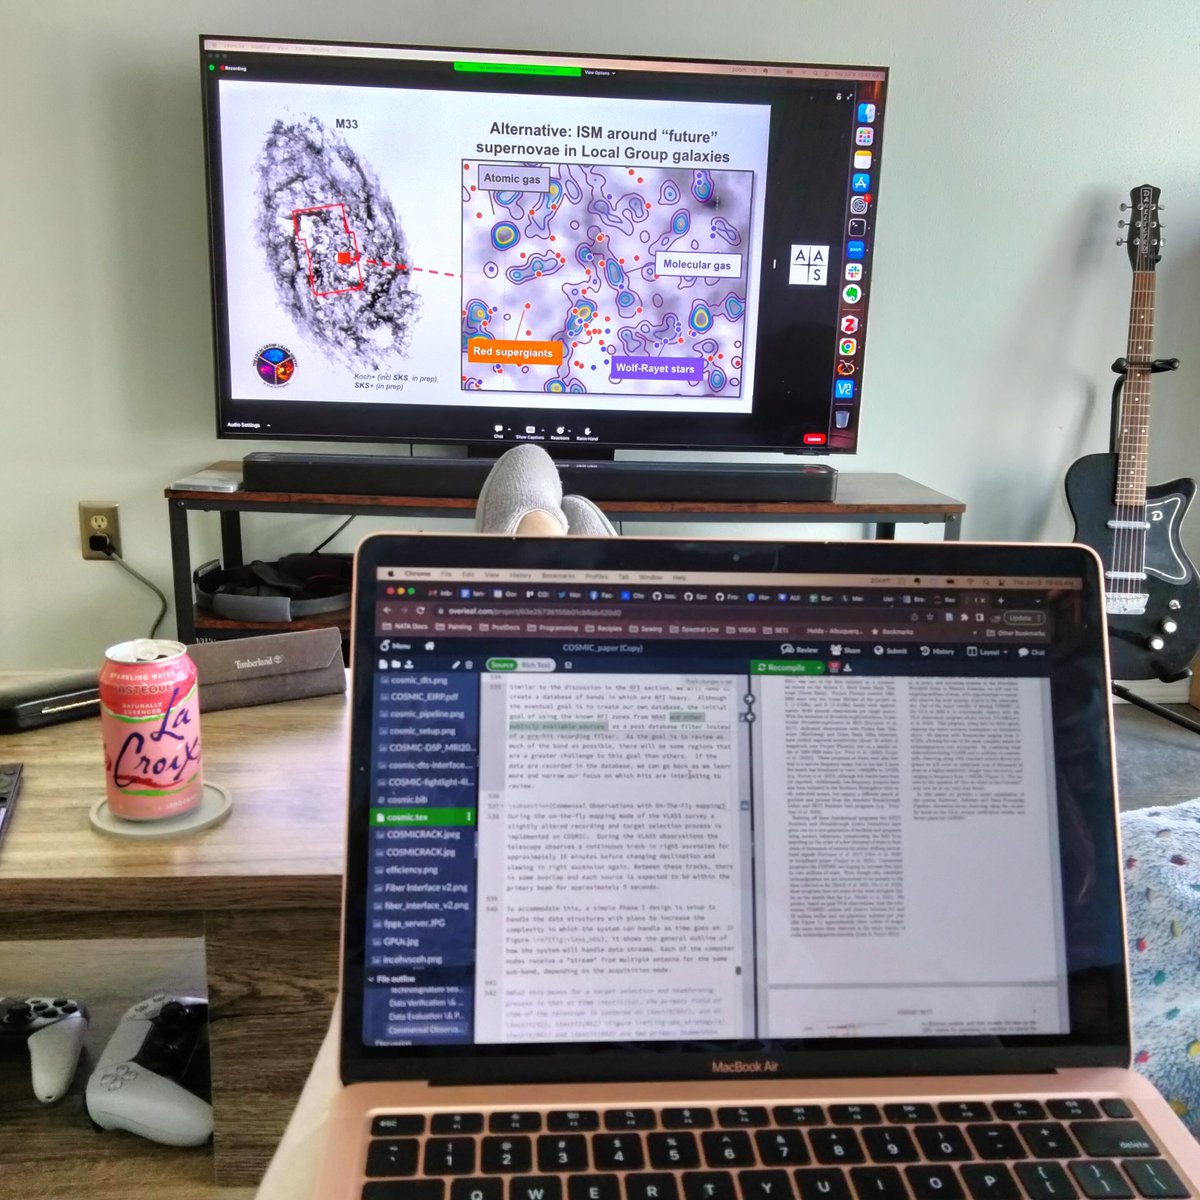 Attending the last day of #AAS242 from home. Simultaneously watching talks and working on writing a paper. #postdoc